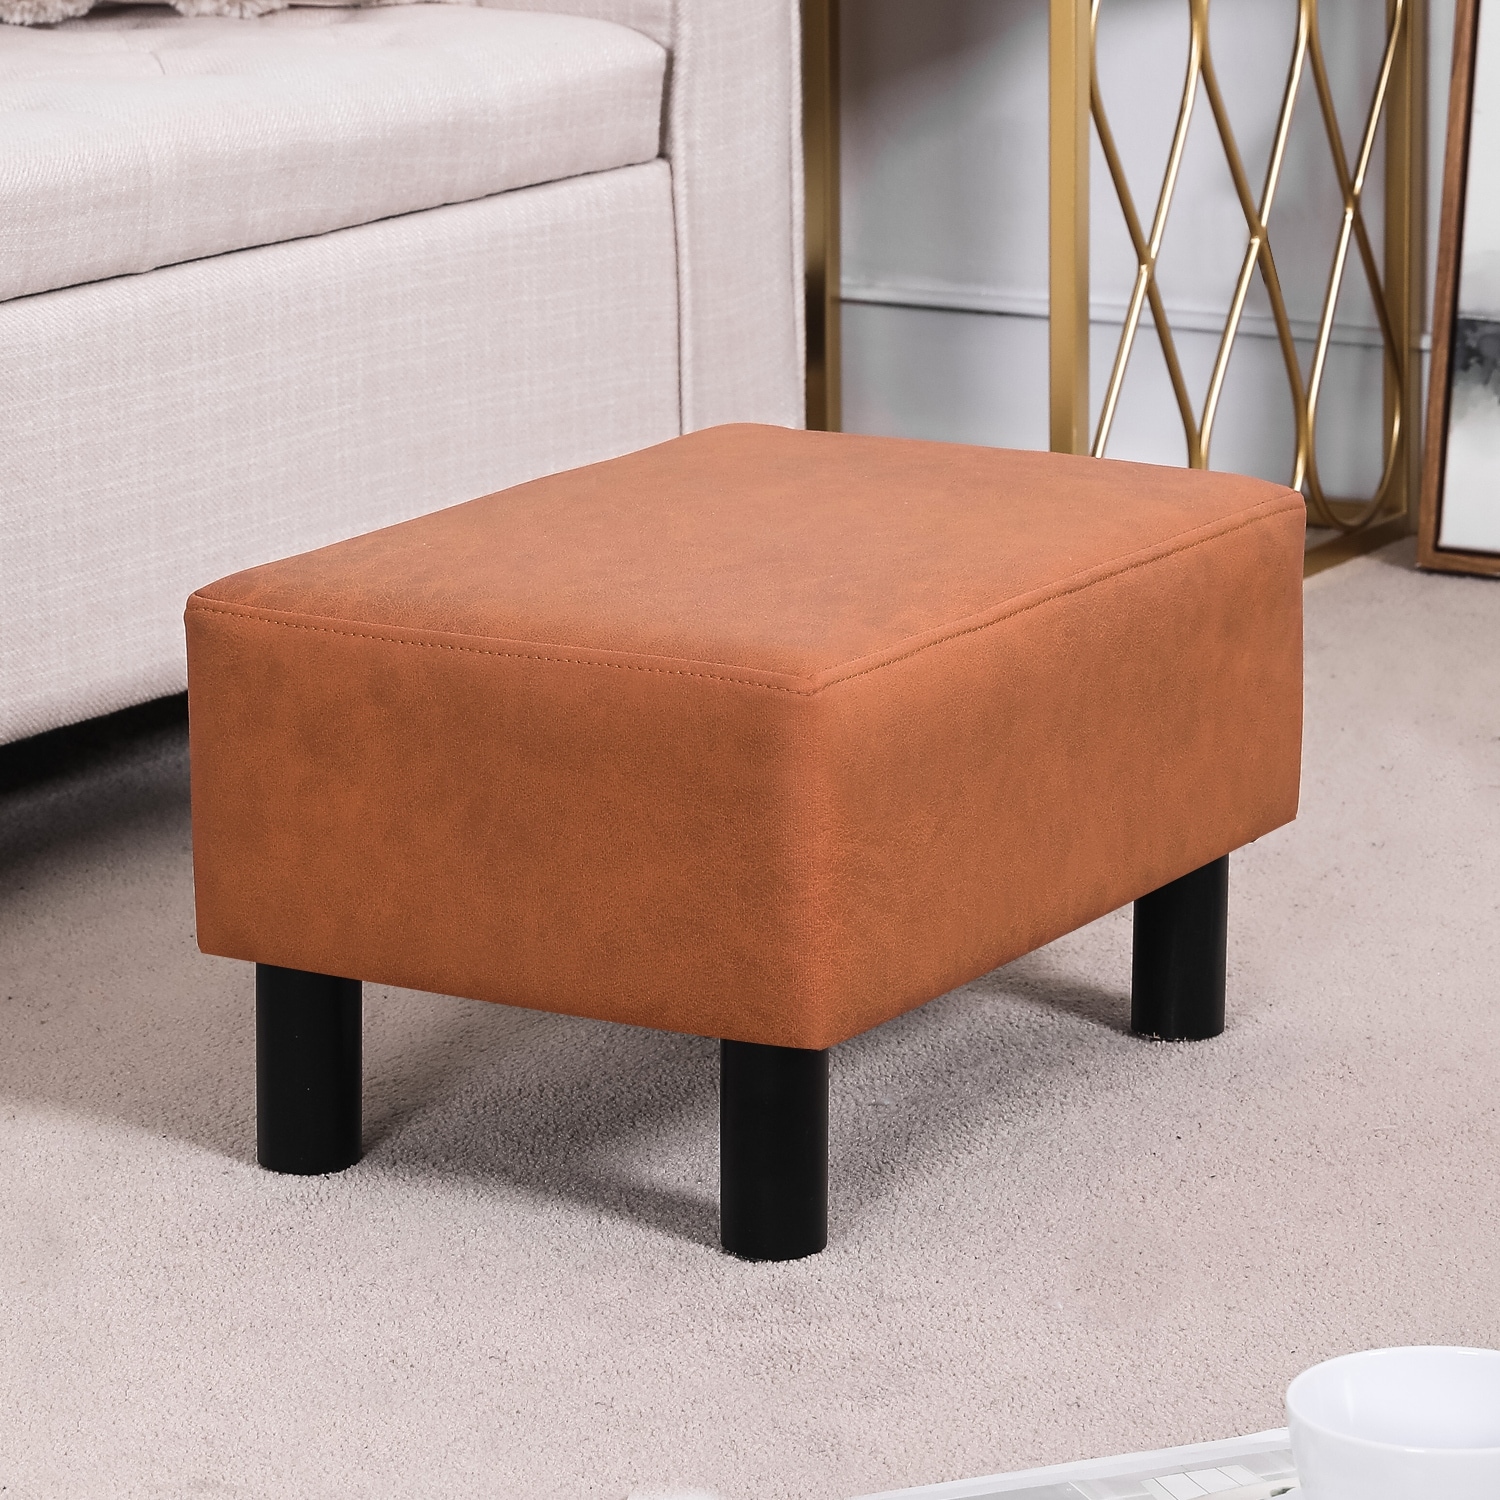 https://ak1.ostkcdn.com/images/products/is/images/direct/7fbb3bff22c2e7b927c27b7c2a61100f7290625c/Adeco-Footstool-Ottoman-Faux-Leather-Foot-Rest-Stool.jpg